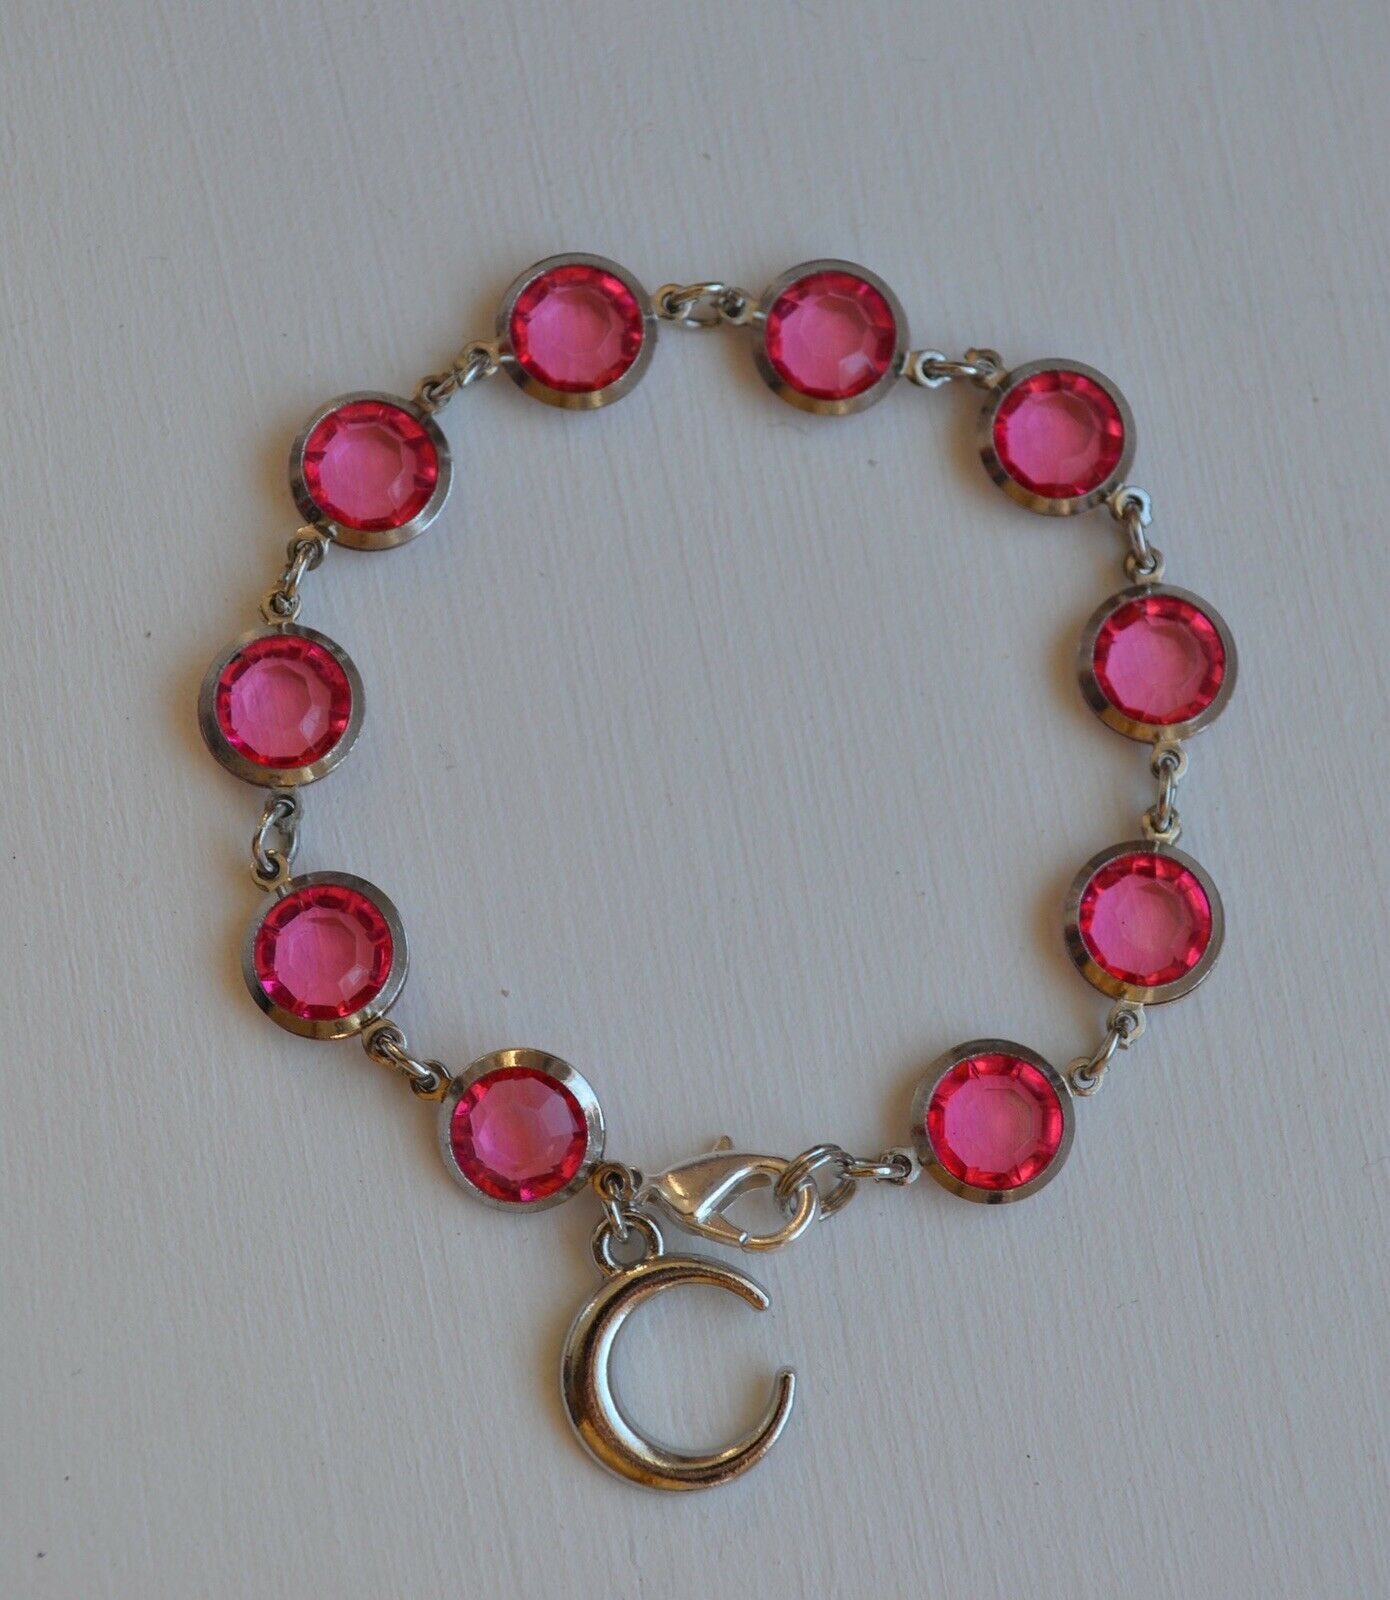 Primary image for Handmade pink glass bead with moon charm bracelet